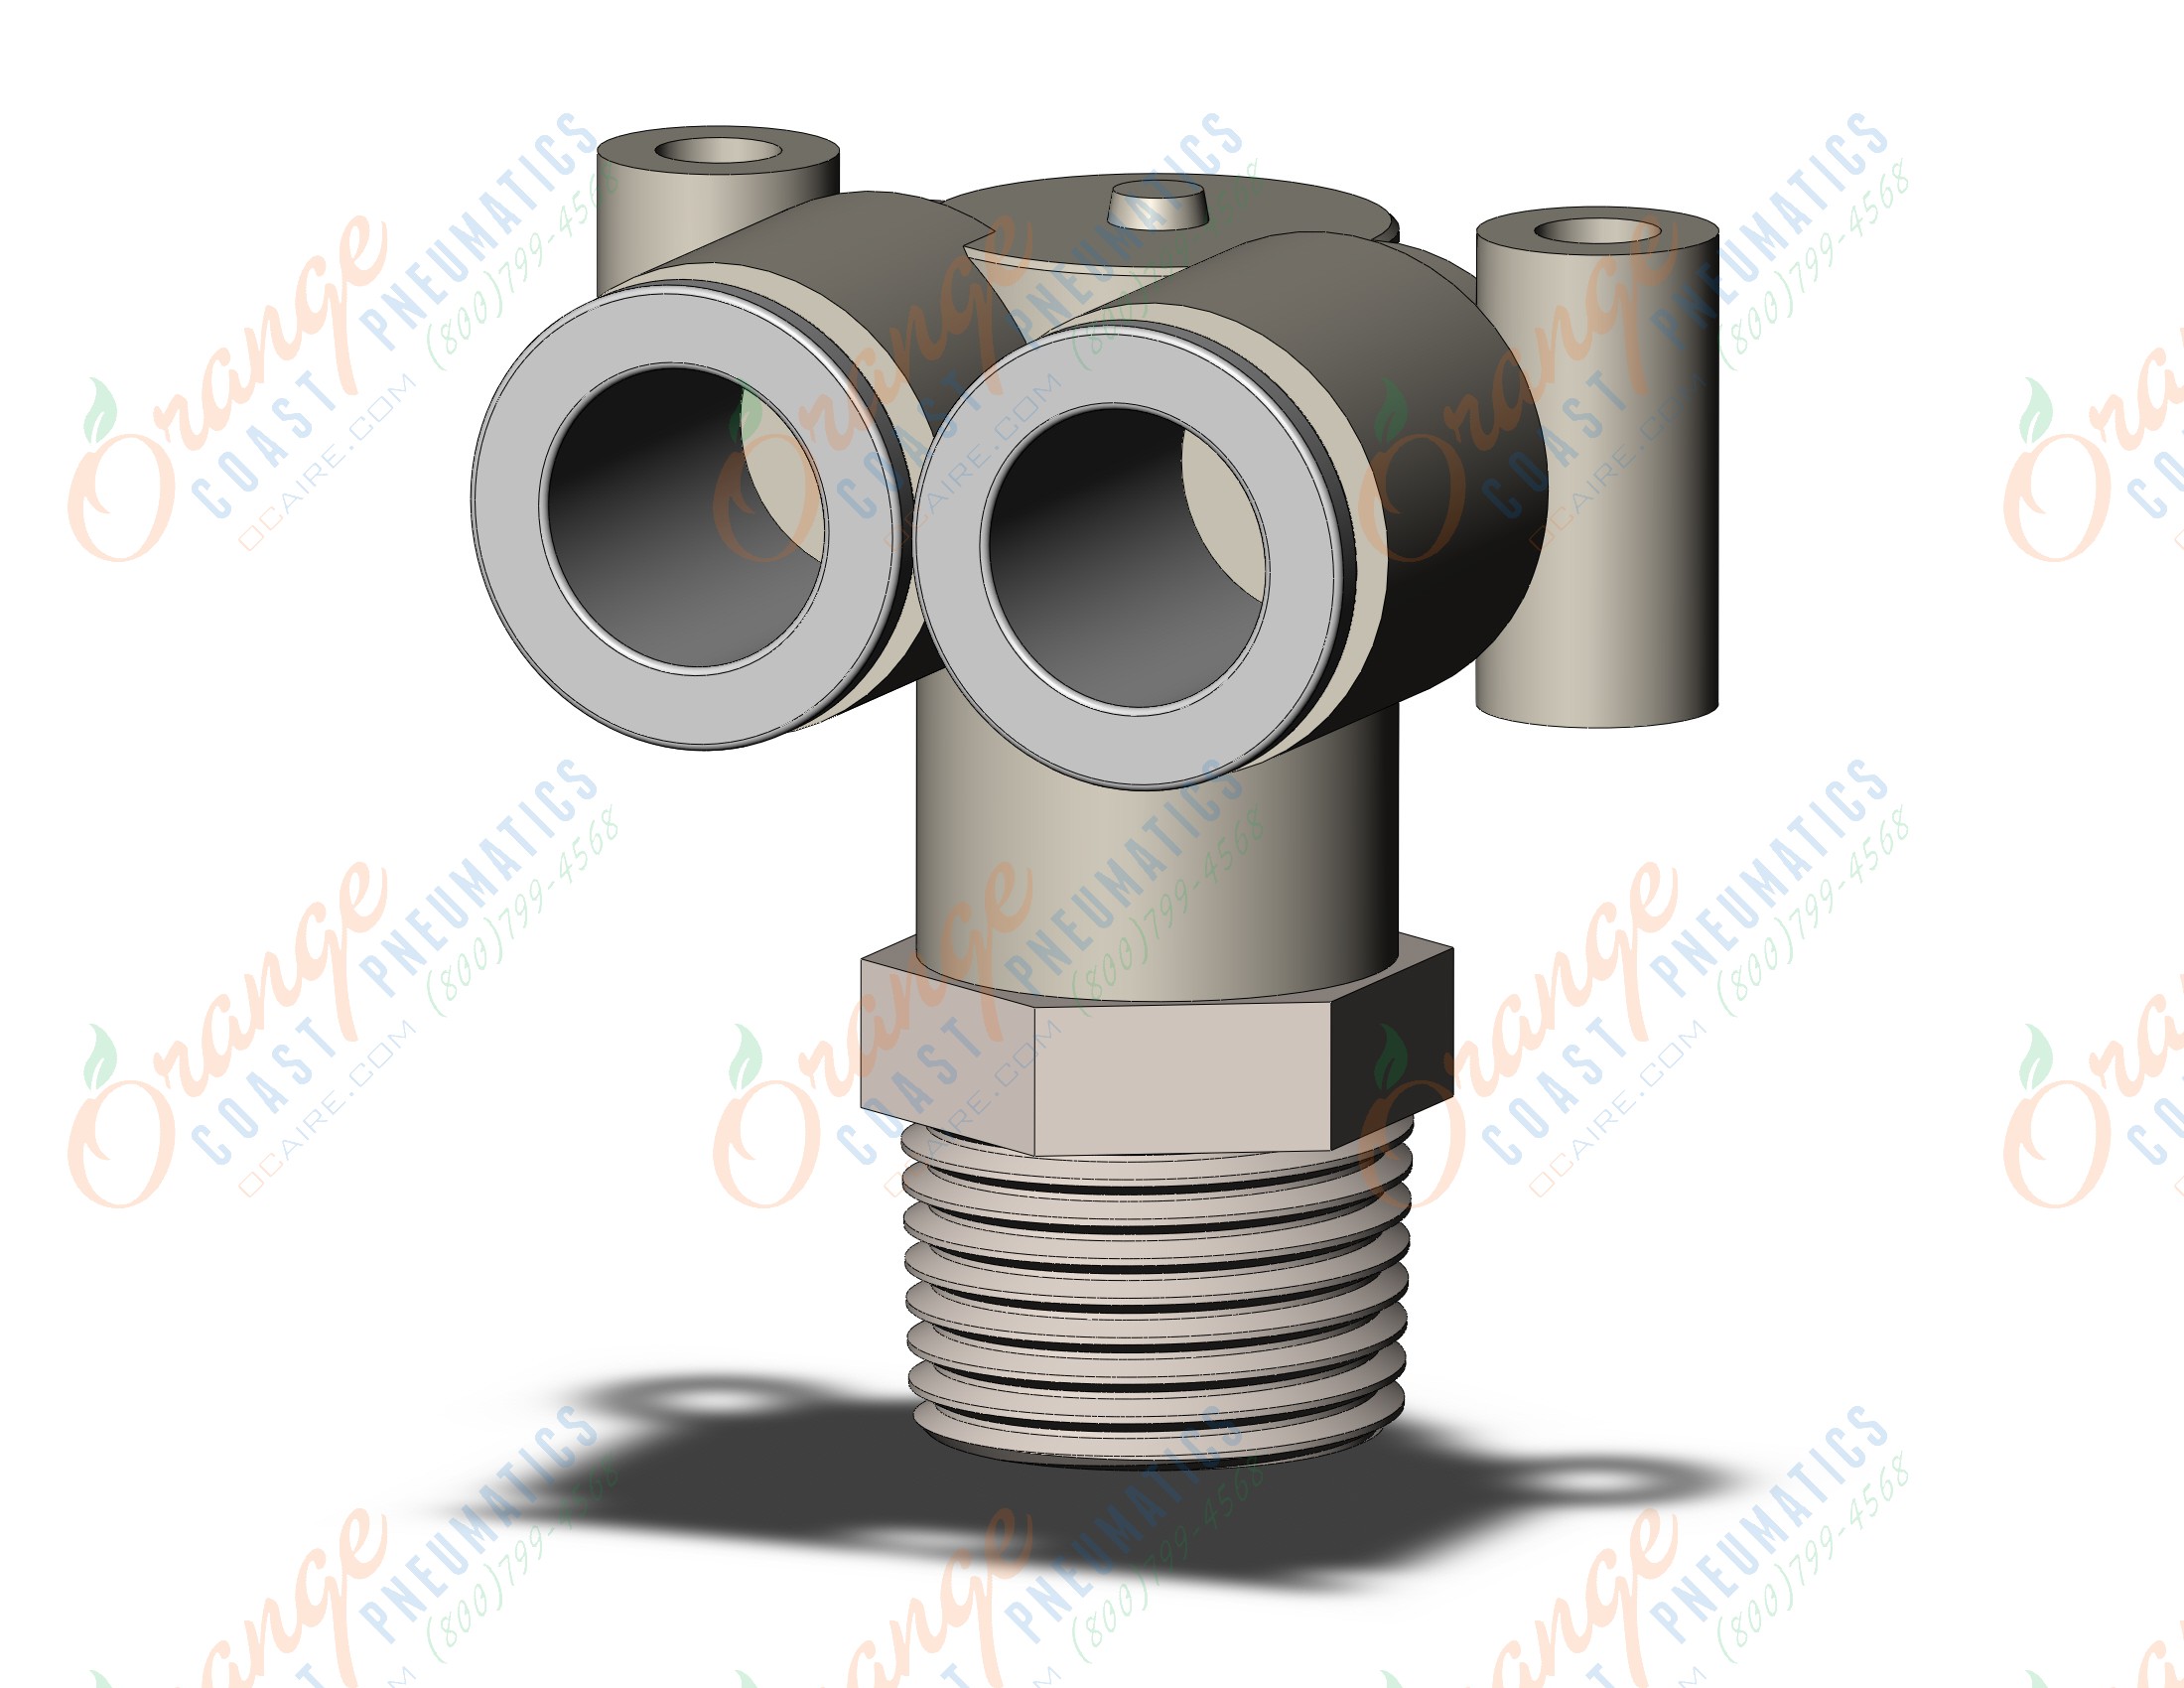 SMC KQ2LU10-03NS fitting, branch union elbow, KQ2 FITTING (sold in packages of 10; price is per piece)